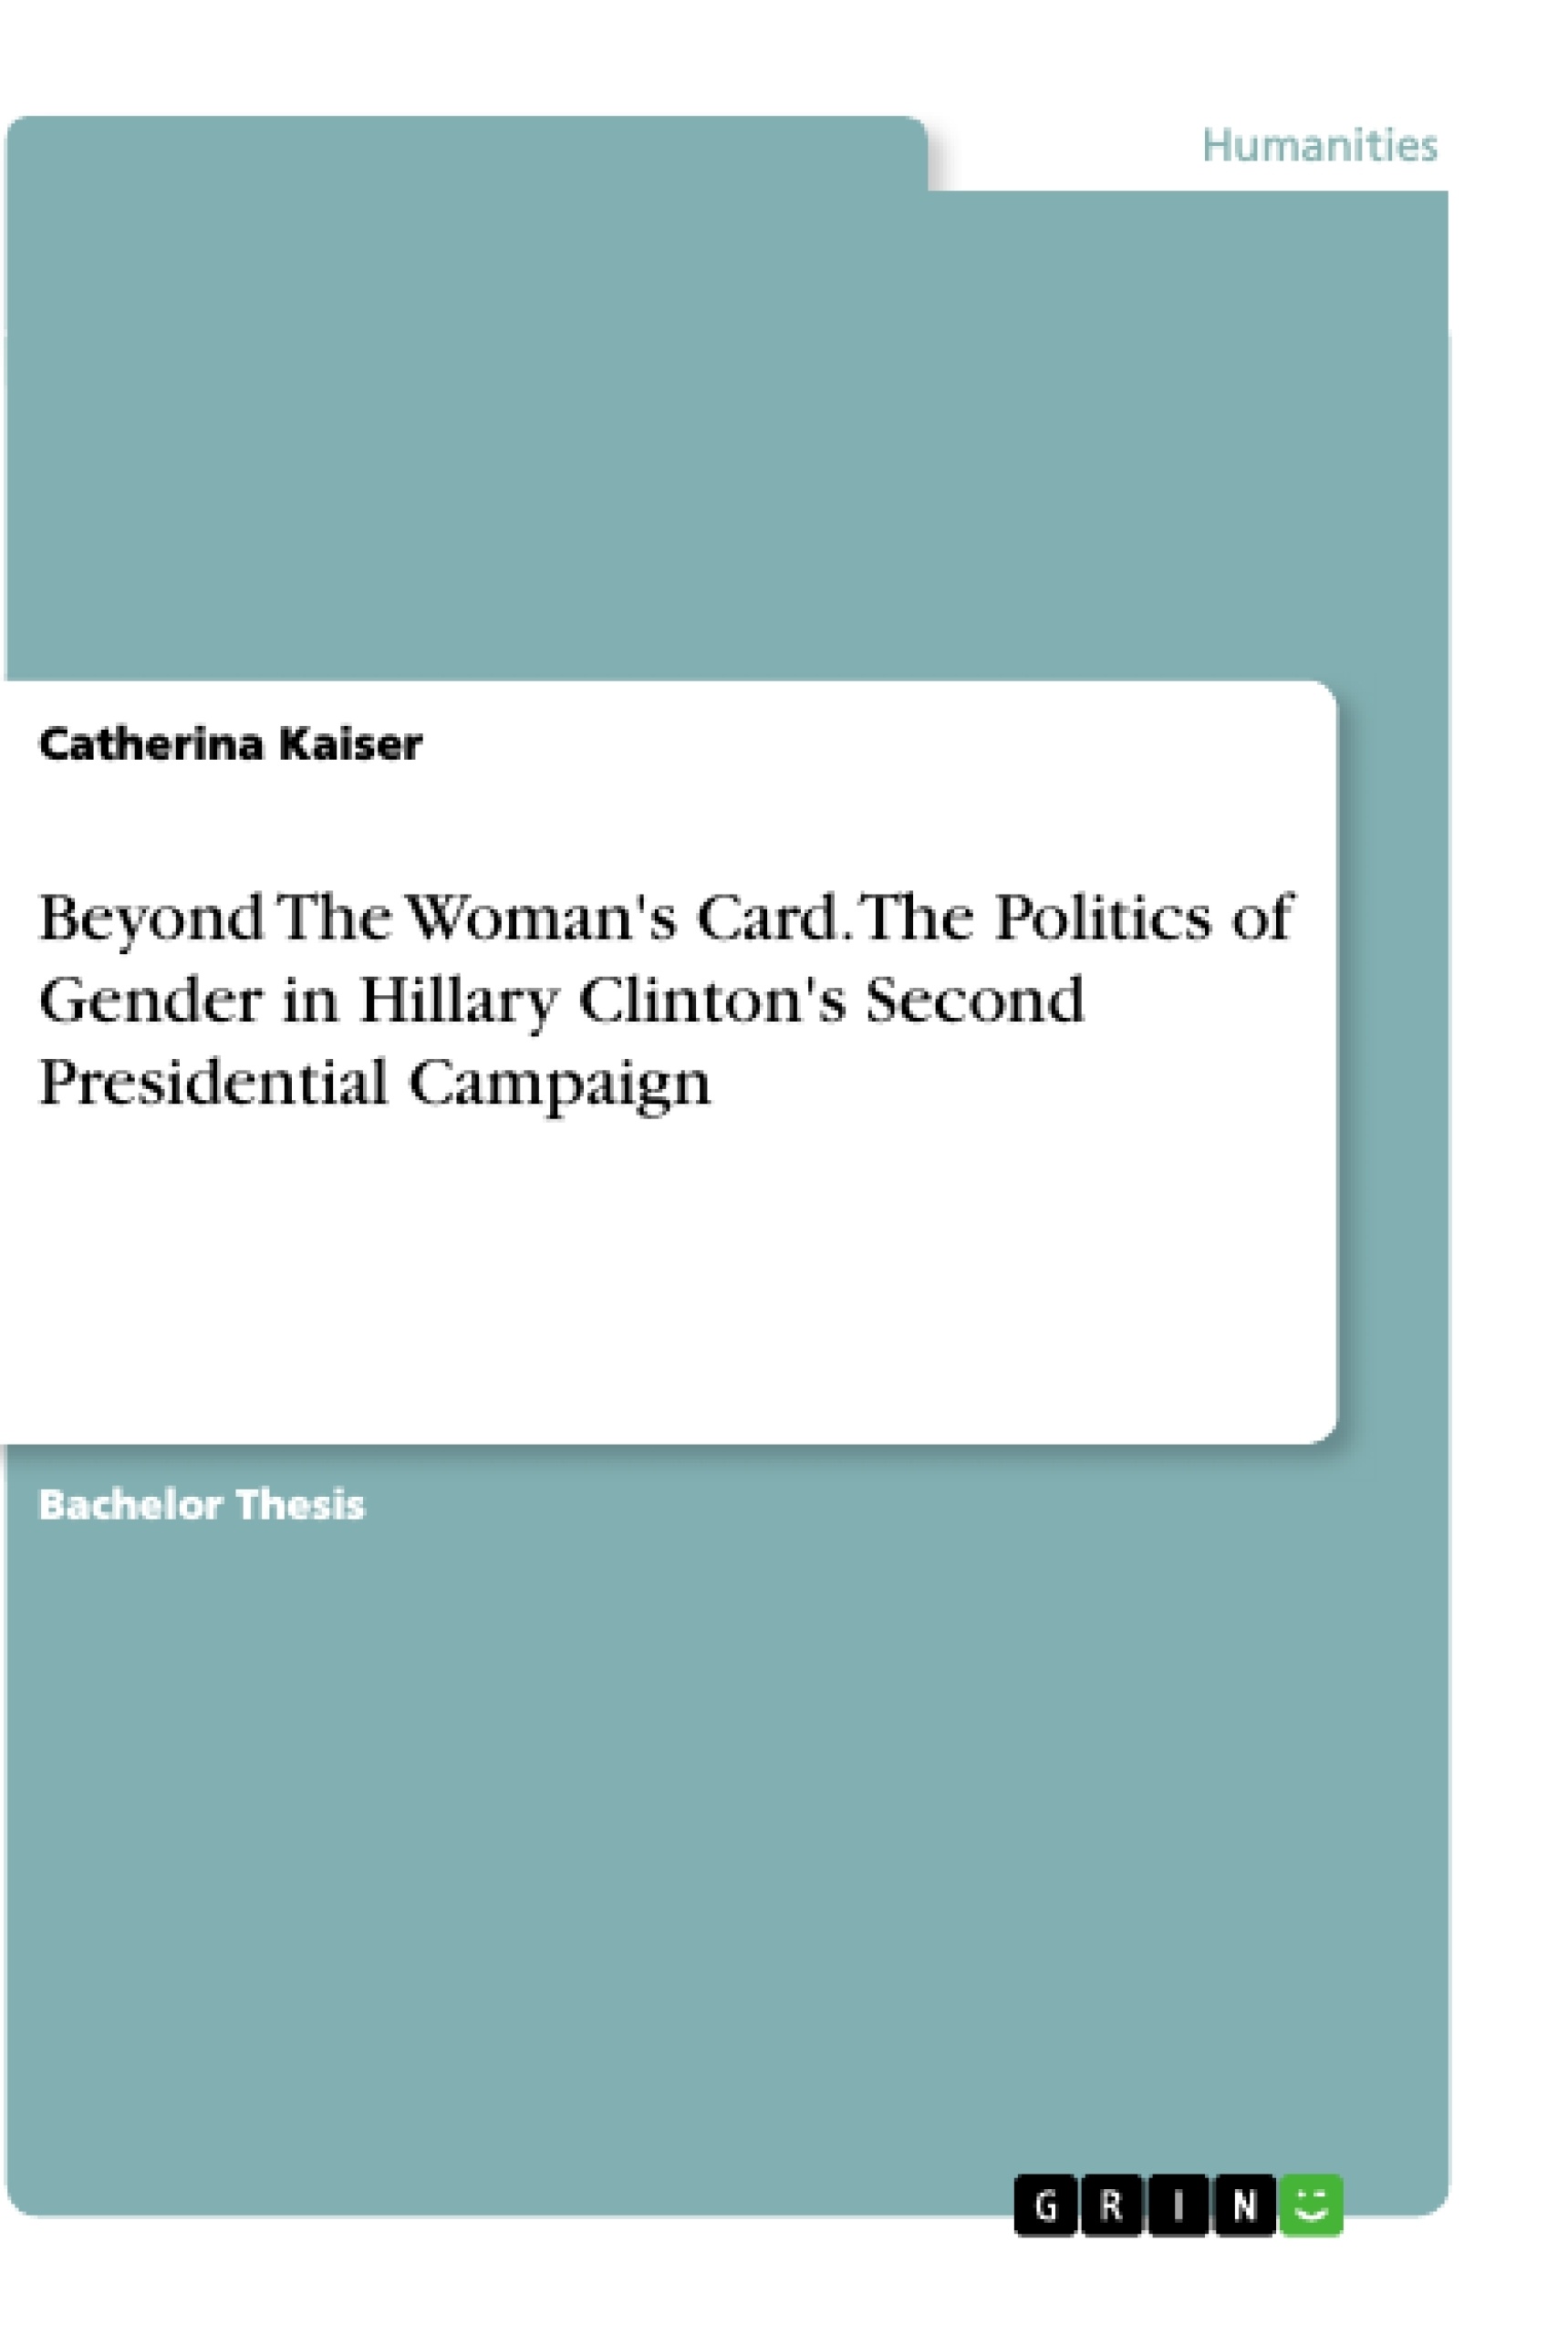 Title: Beyond The Woman's Card. The Politics of Gender in Hillary Clinton's Second Presidential Campaign